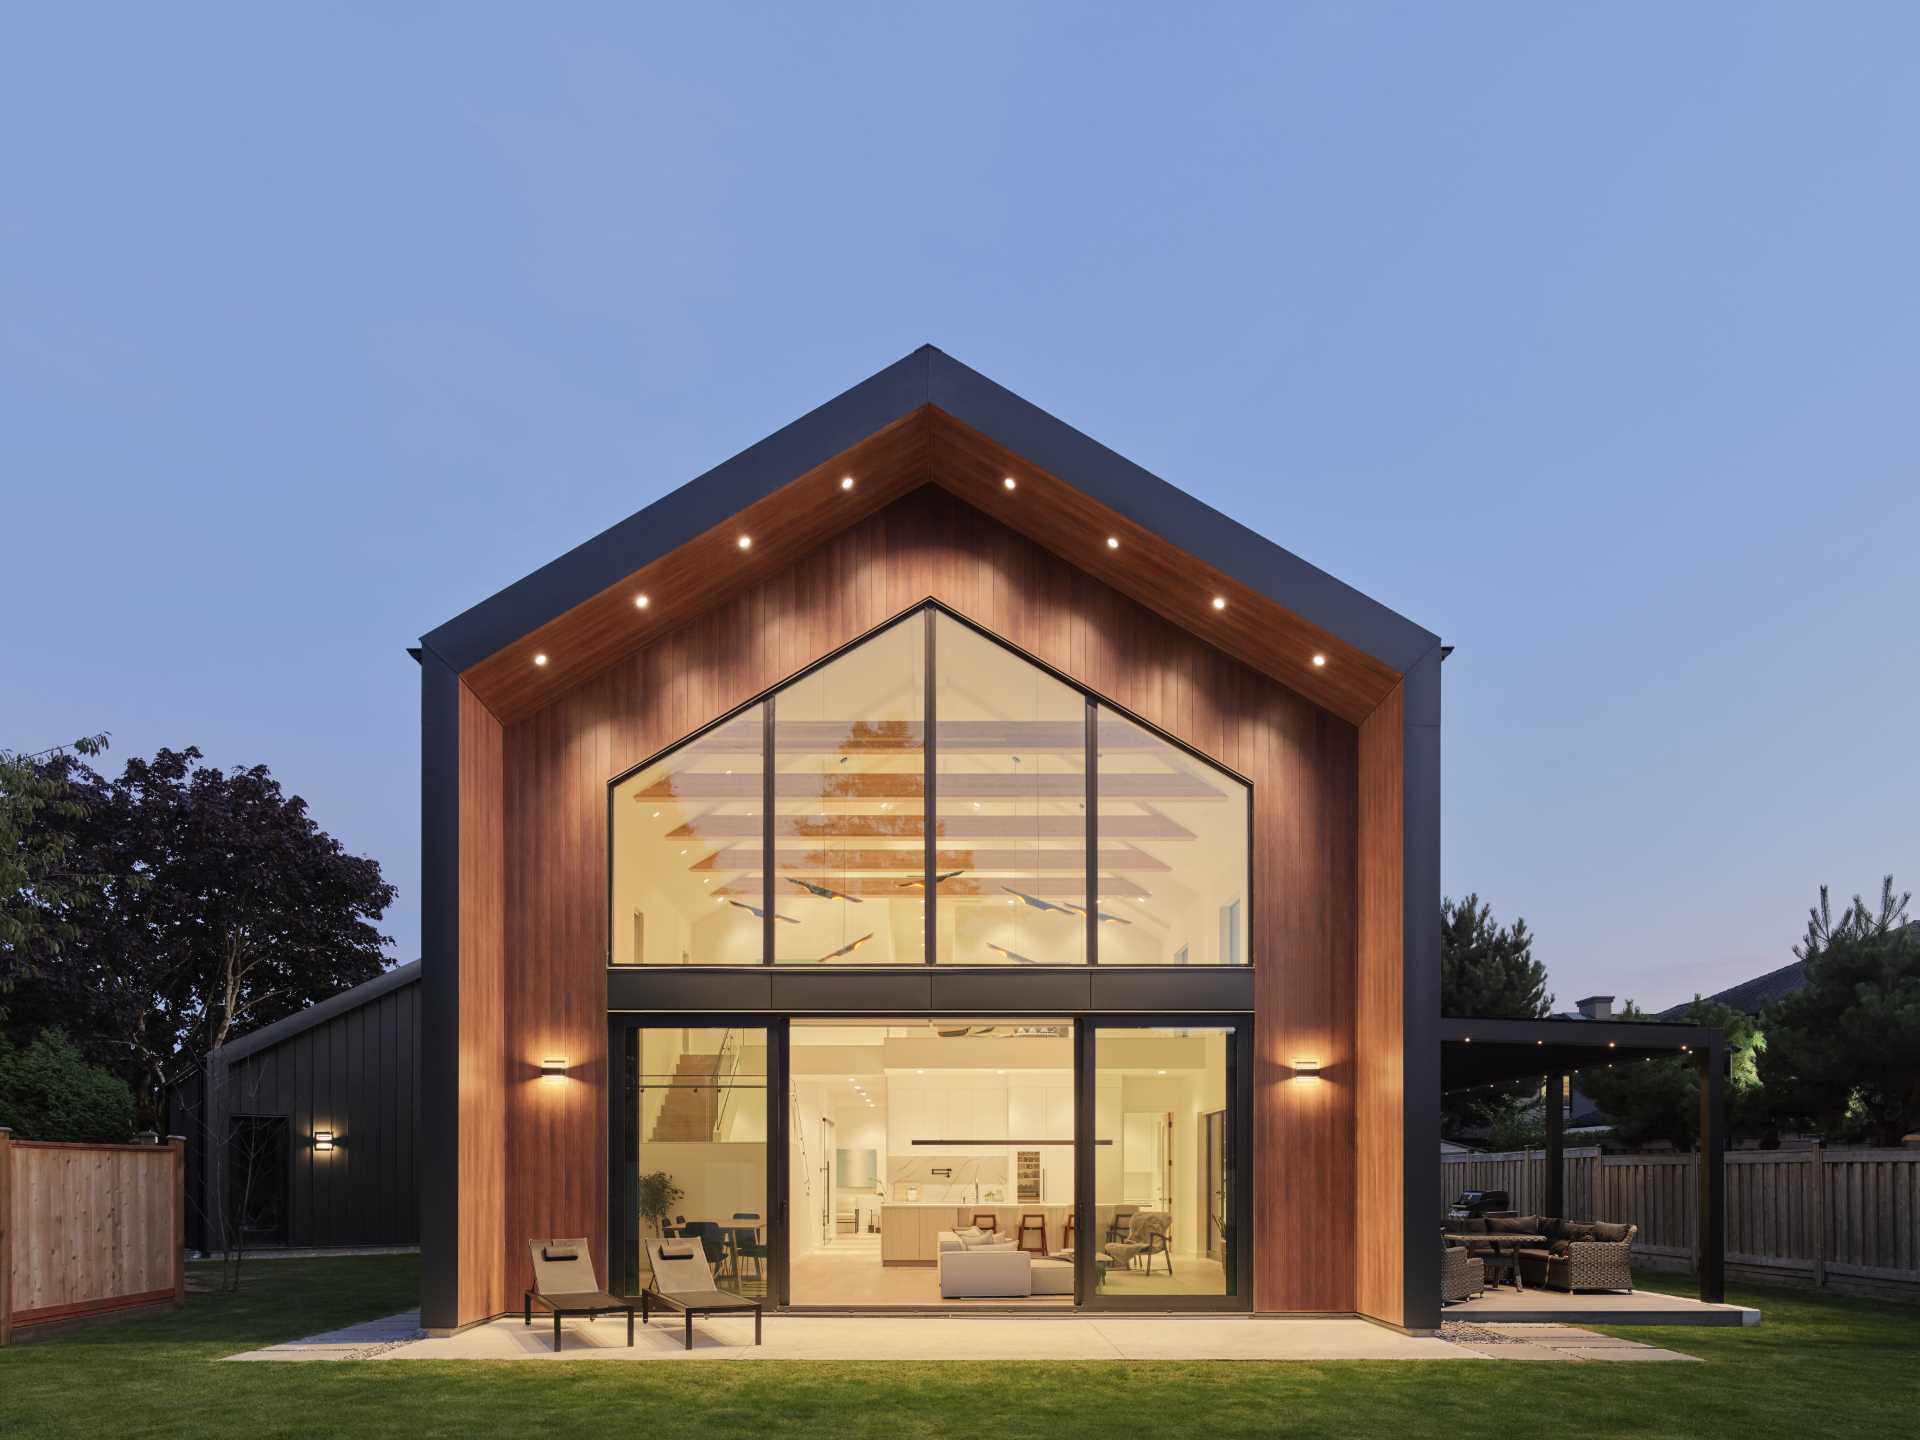 A modern barn house features a vaulted ceiling that reaches a peak height of 25 feet (7m).